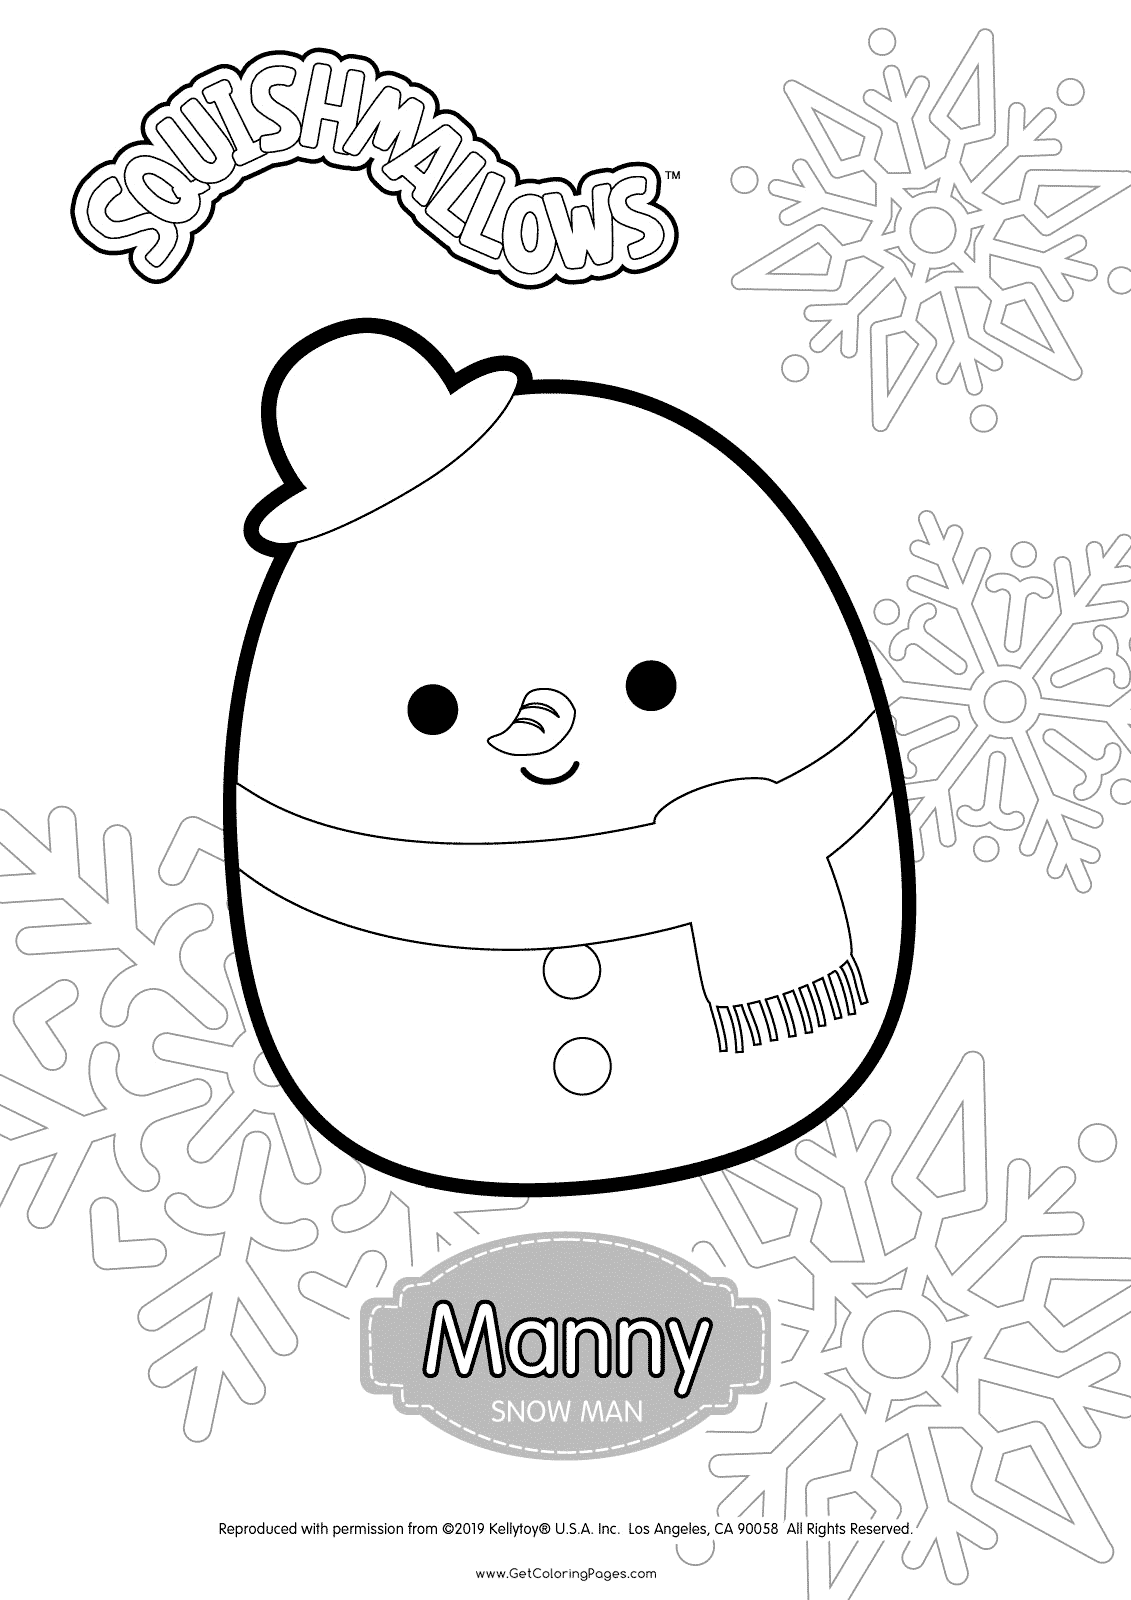 Squishmallows Snow Man Manny Coloring Pages - Get Coloring Pages